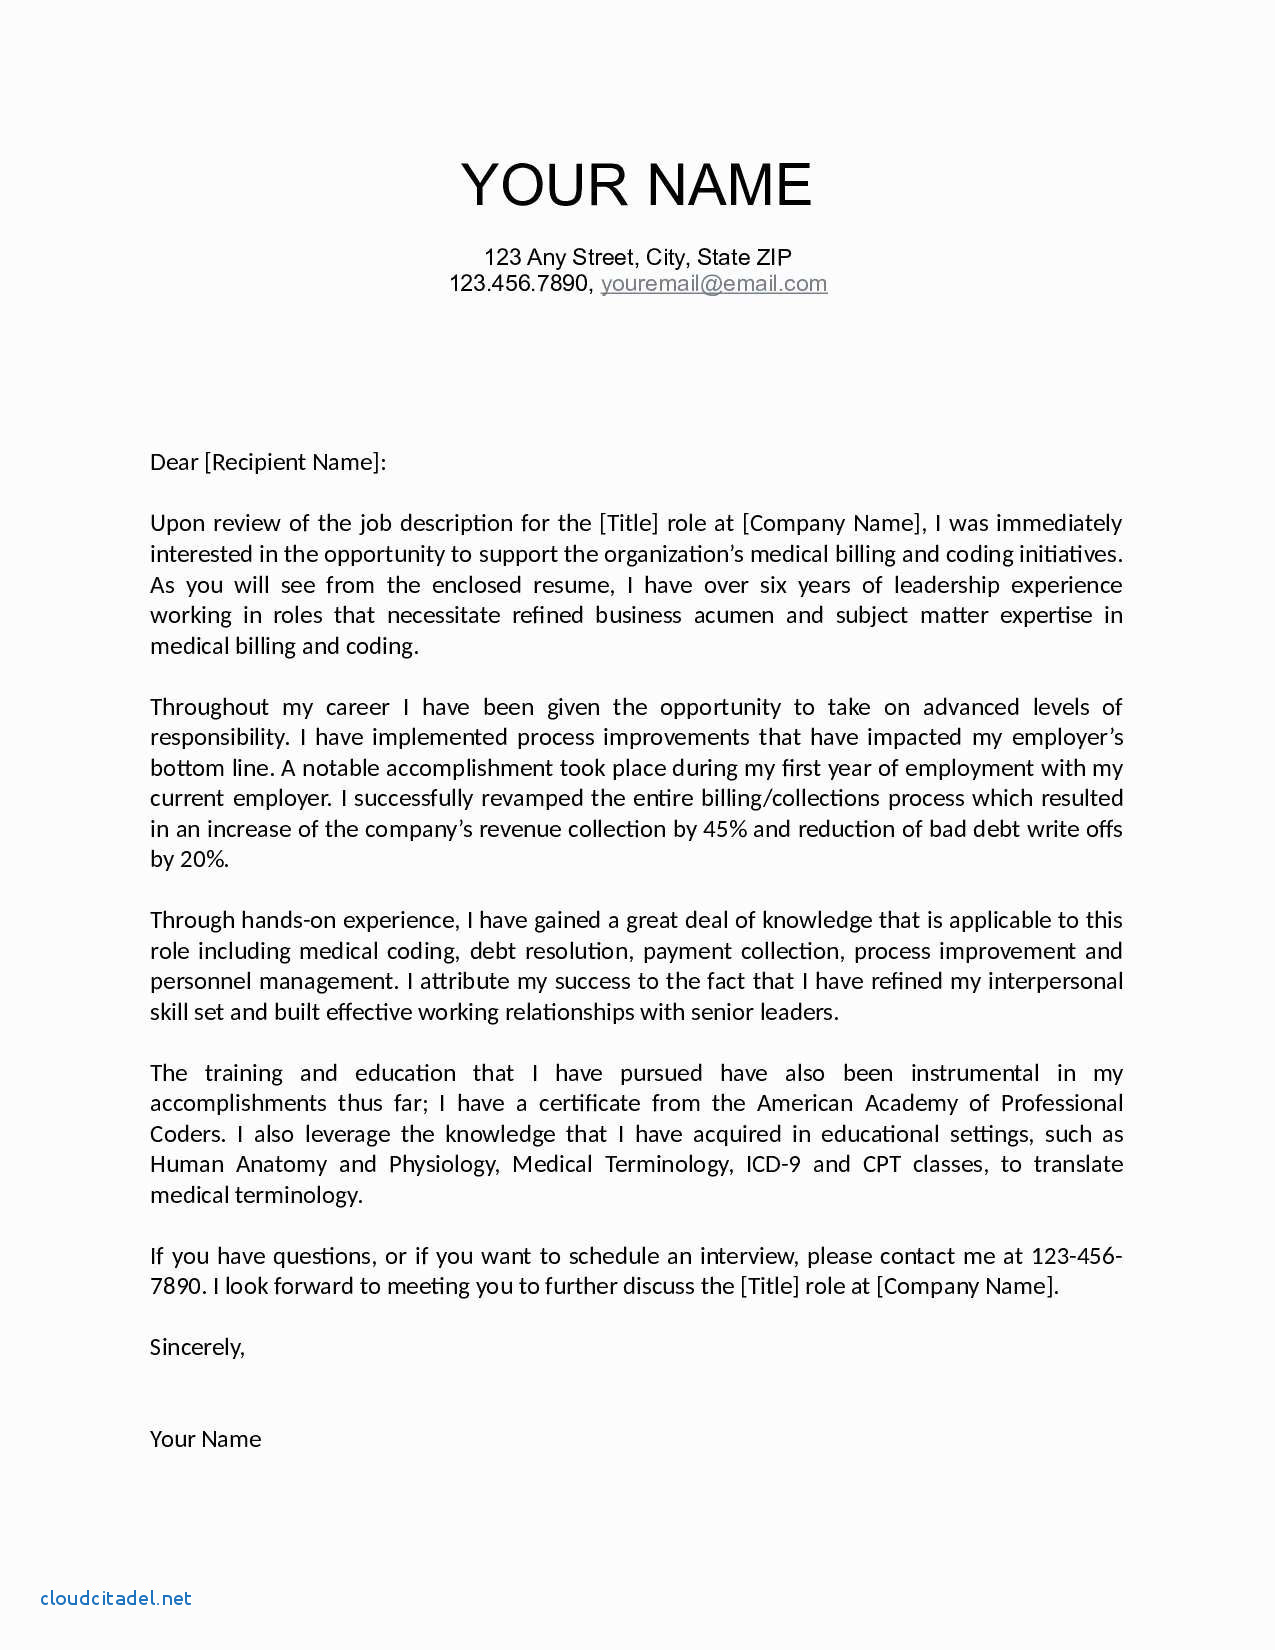 Cover Letter Template for Teenager - Beautiful Professional Job Application Letter Template